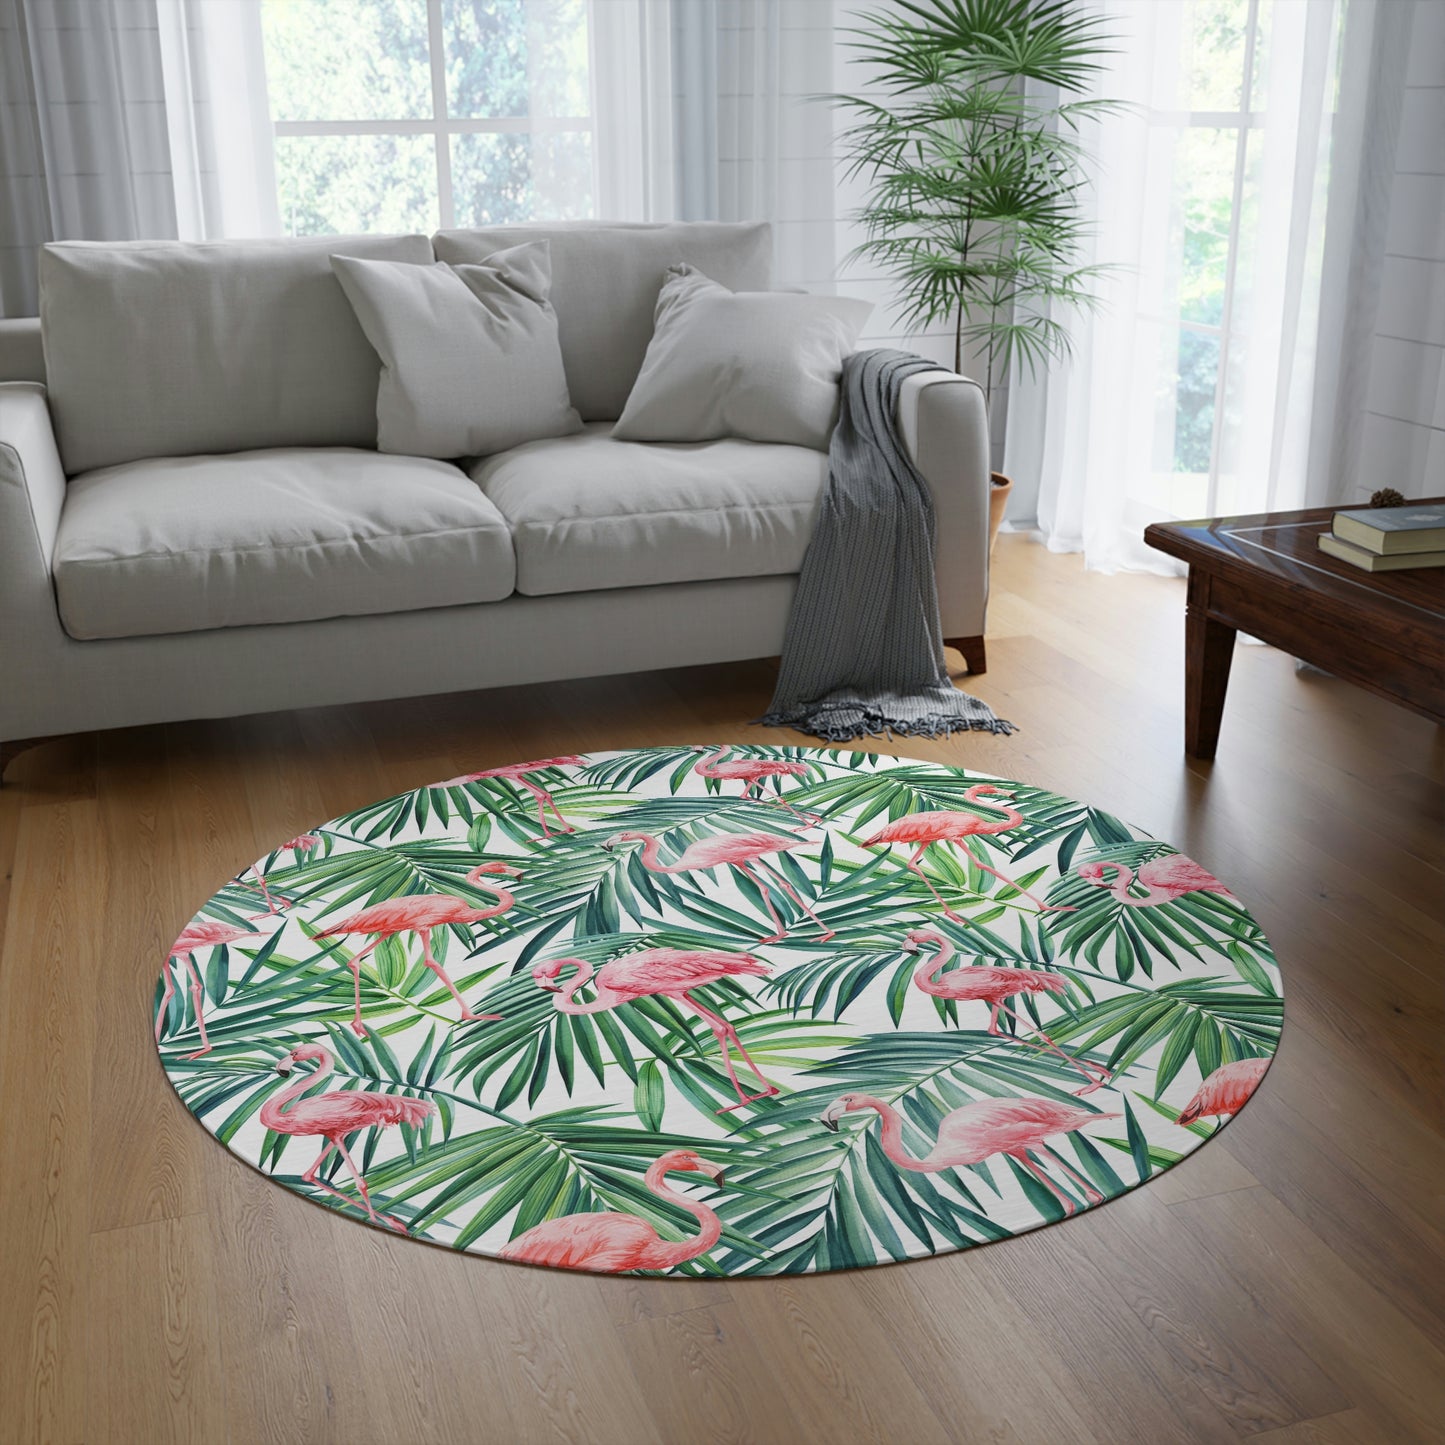 Pink Flamingos and Palm Leaves Round Rug